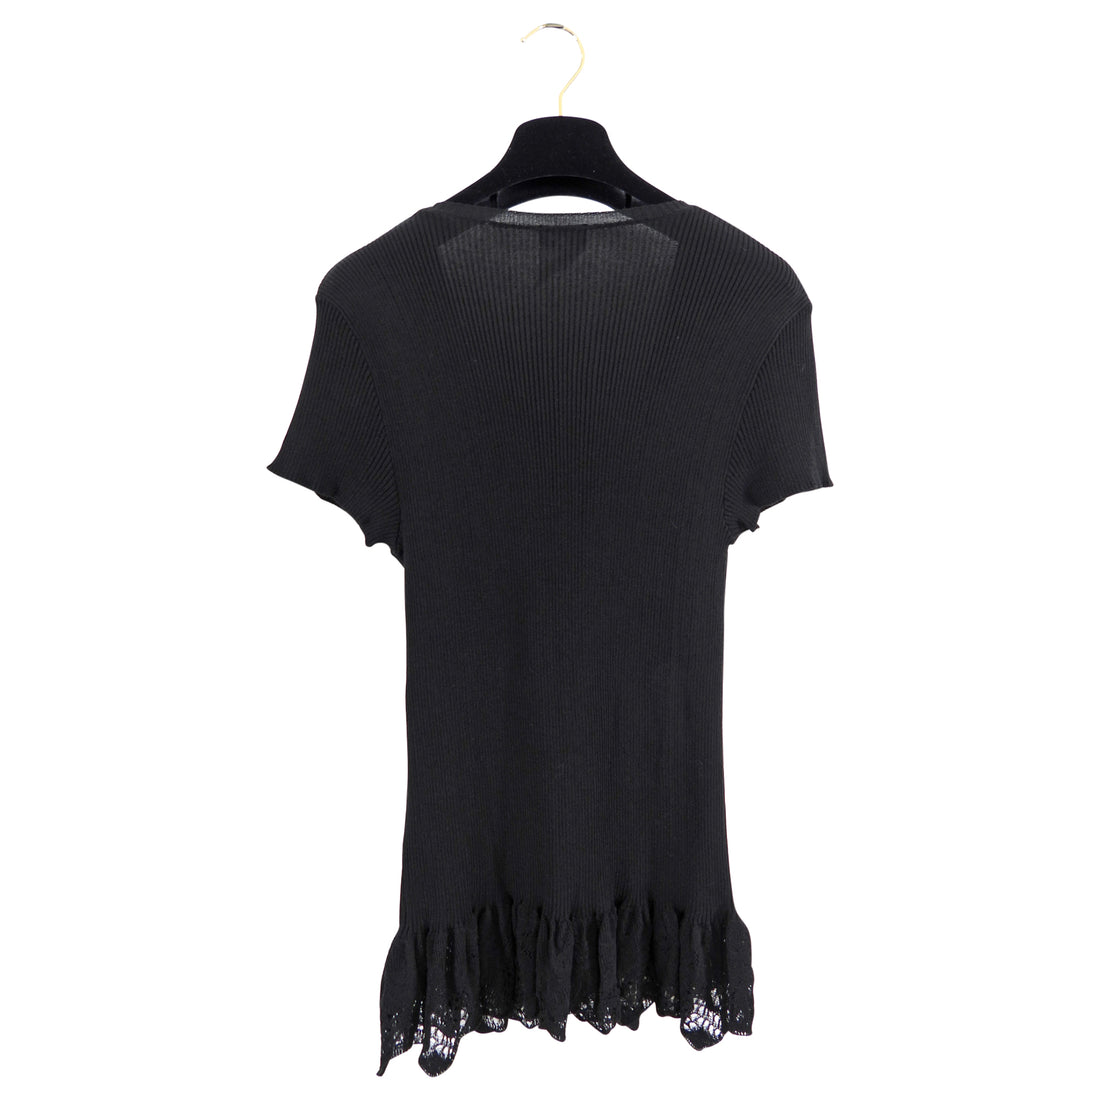 Chanel 06P Black Rib Knit Top with Lace Hem - FR42 (8/10) – I MISS YOU  VINTAGE